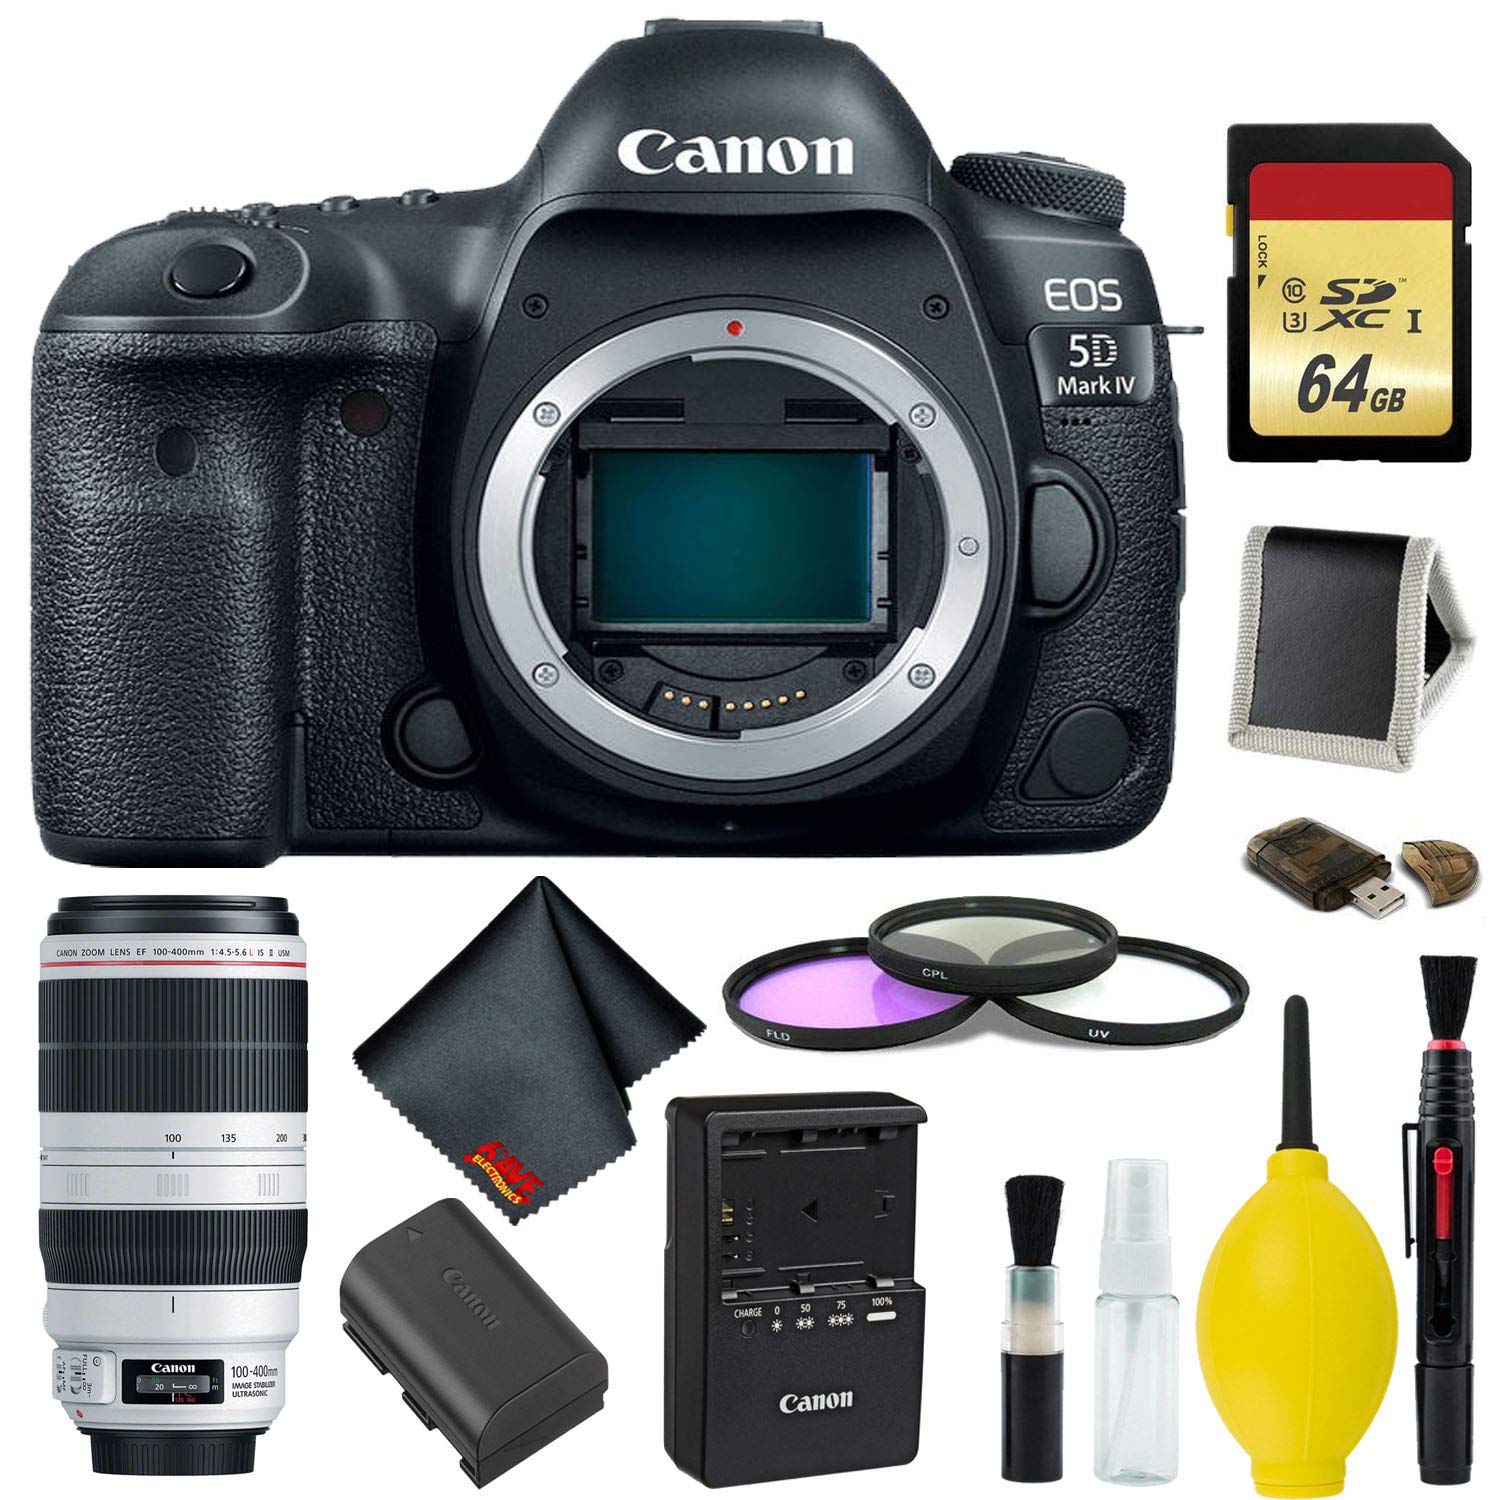 Canon EOS 5D Mark IV DSLR Camera Body Only Complete Kit (International Model) w/Canon EF 100-400mm f/4.5-5.6L is II USM